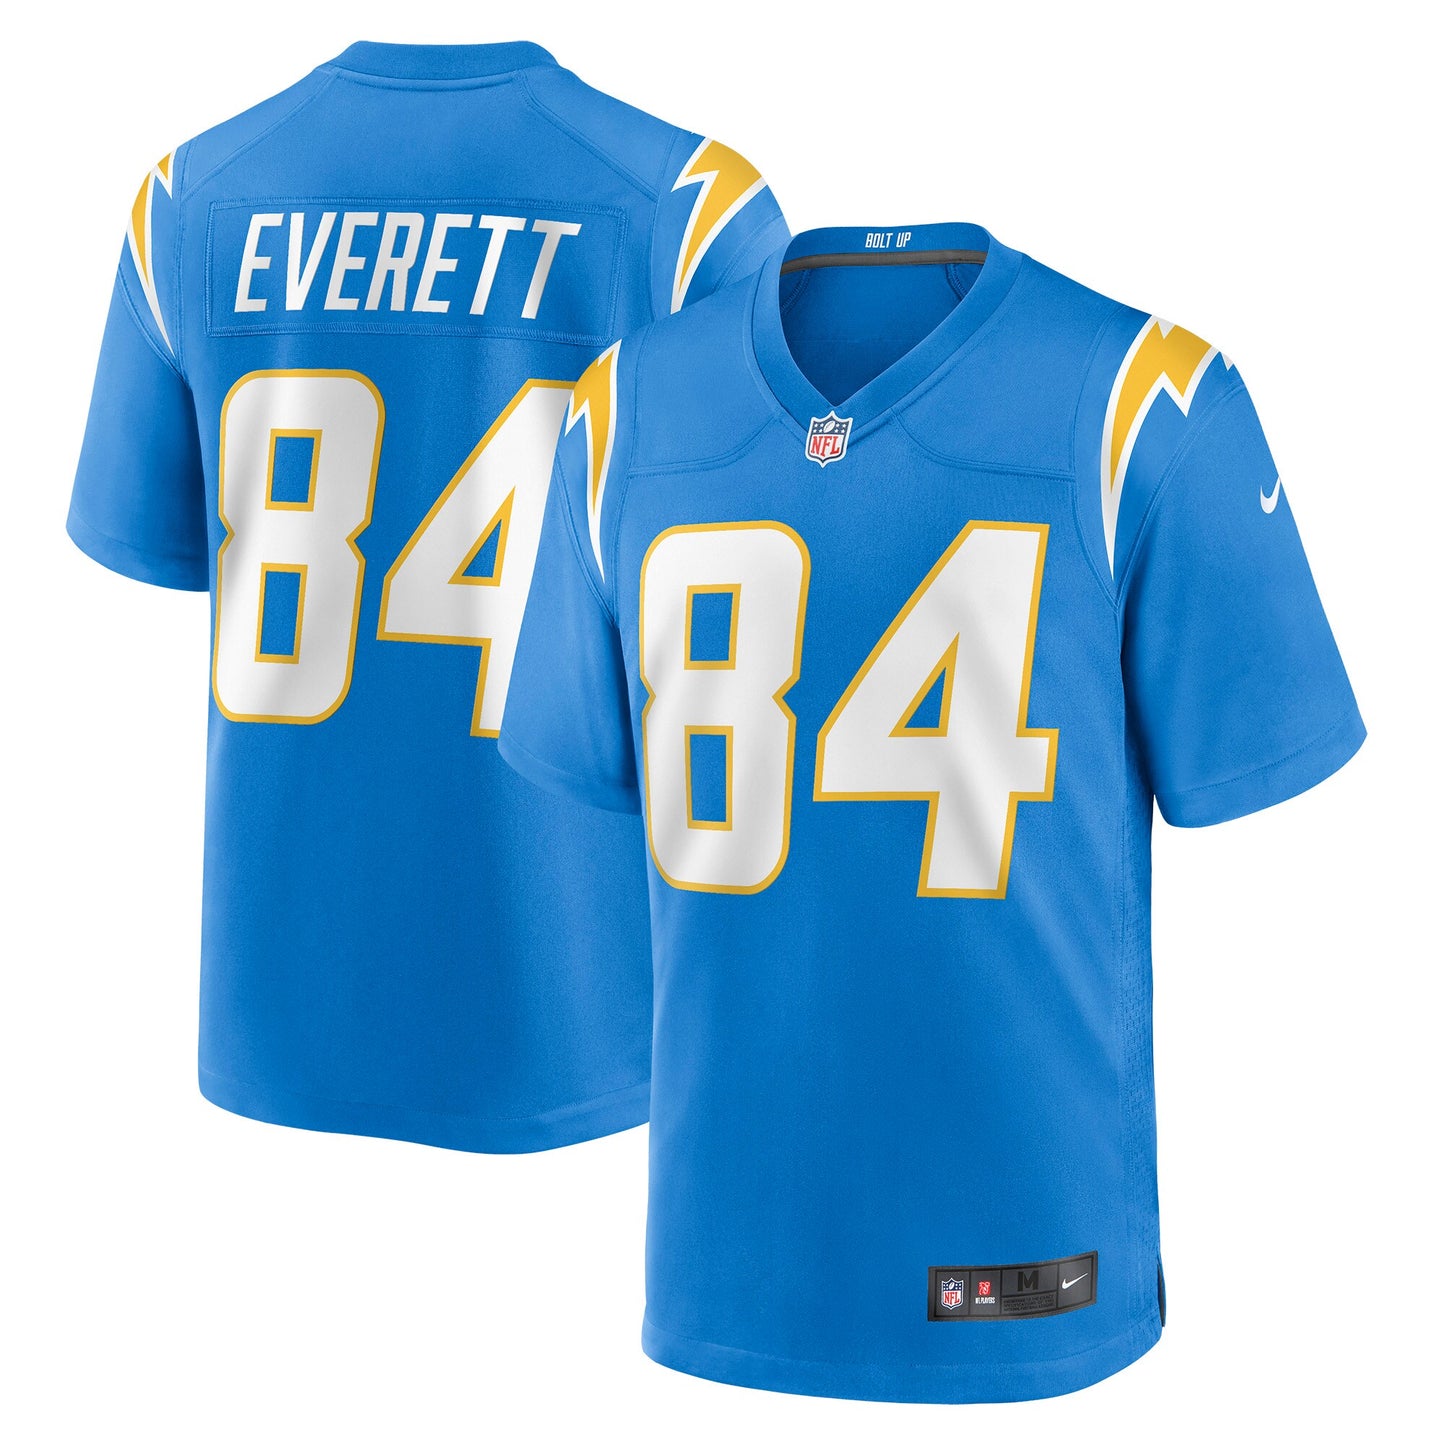 Gerald Everett Los Angeles Chargers Nike Game Jersey - Powder Blue